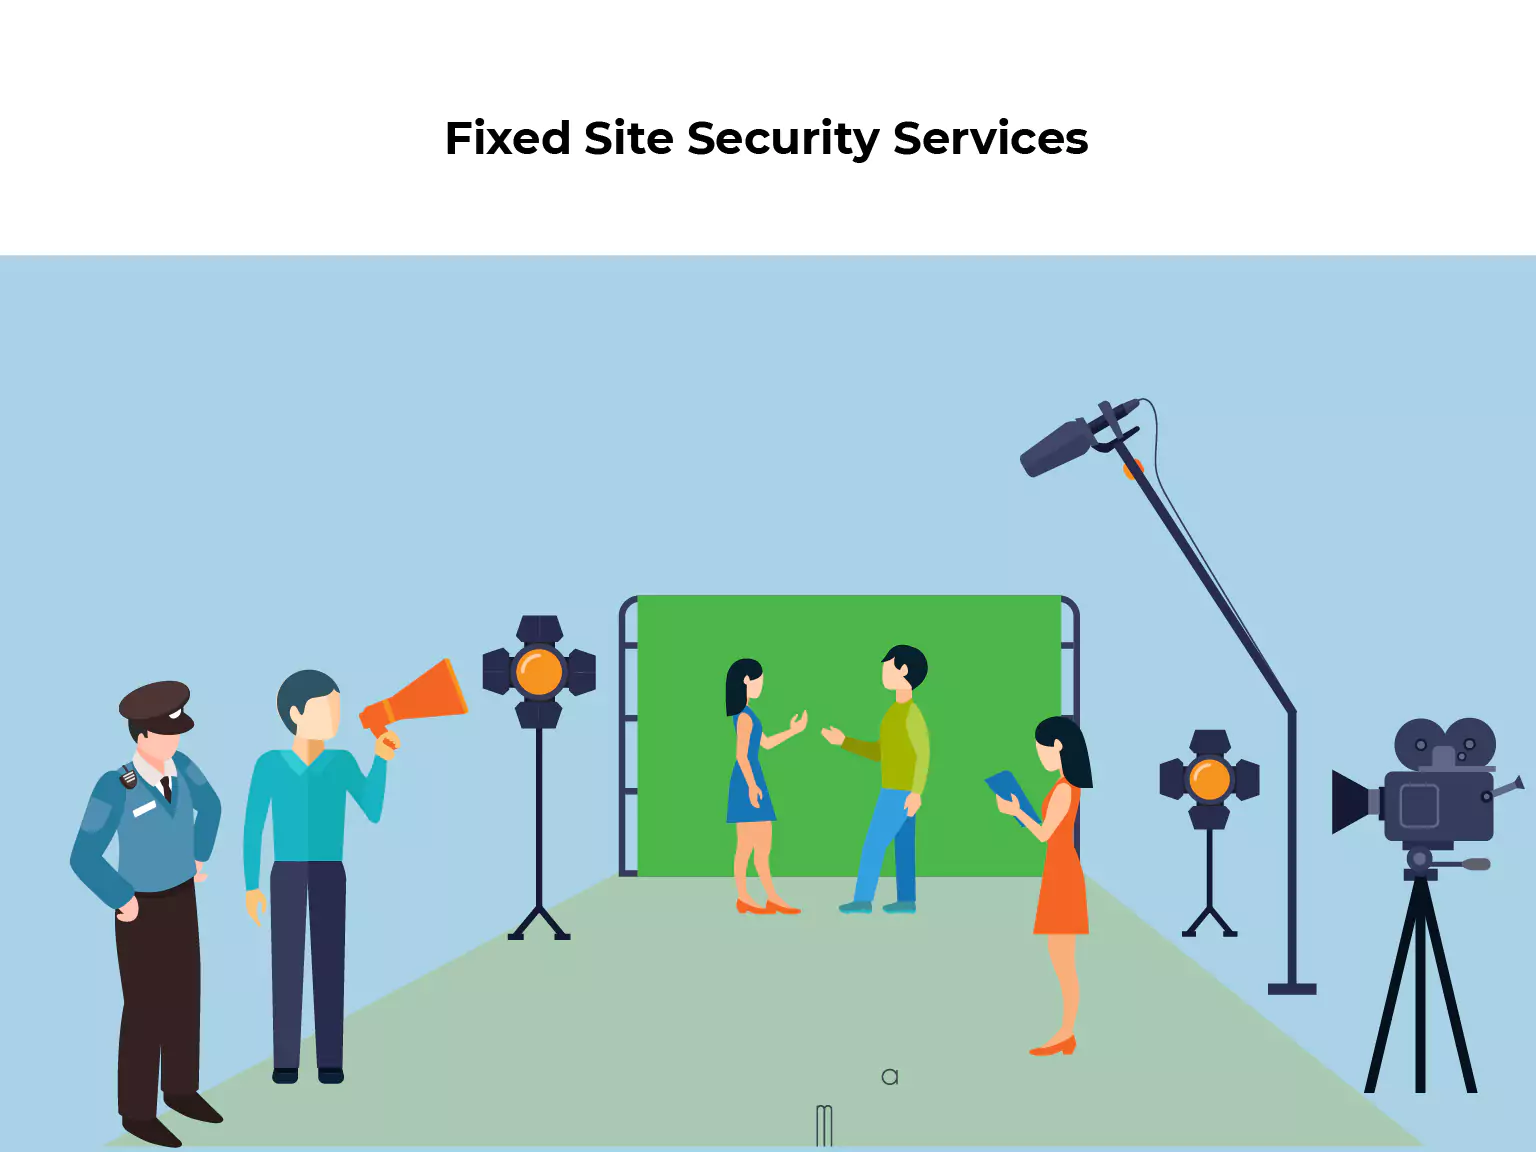 Fixed Site Security Services